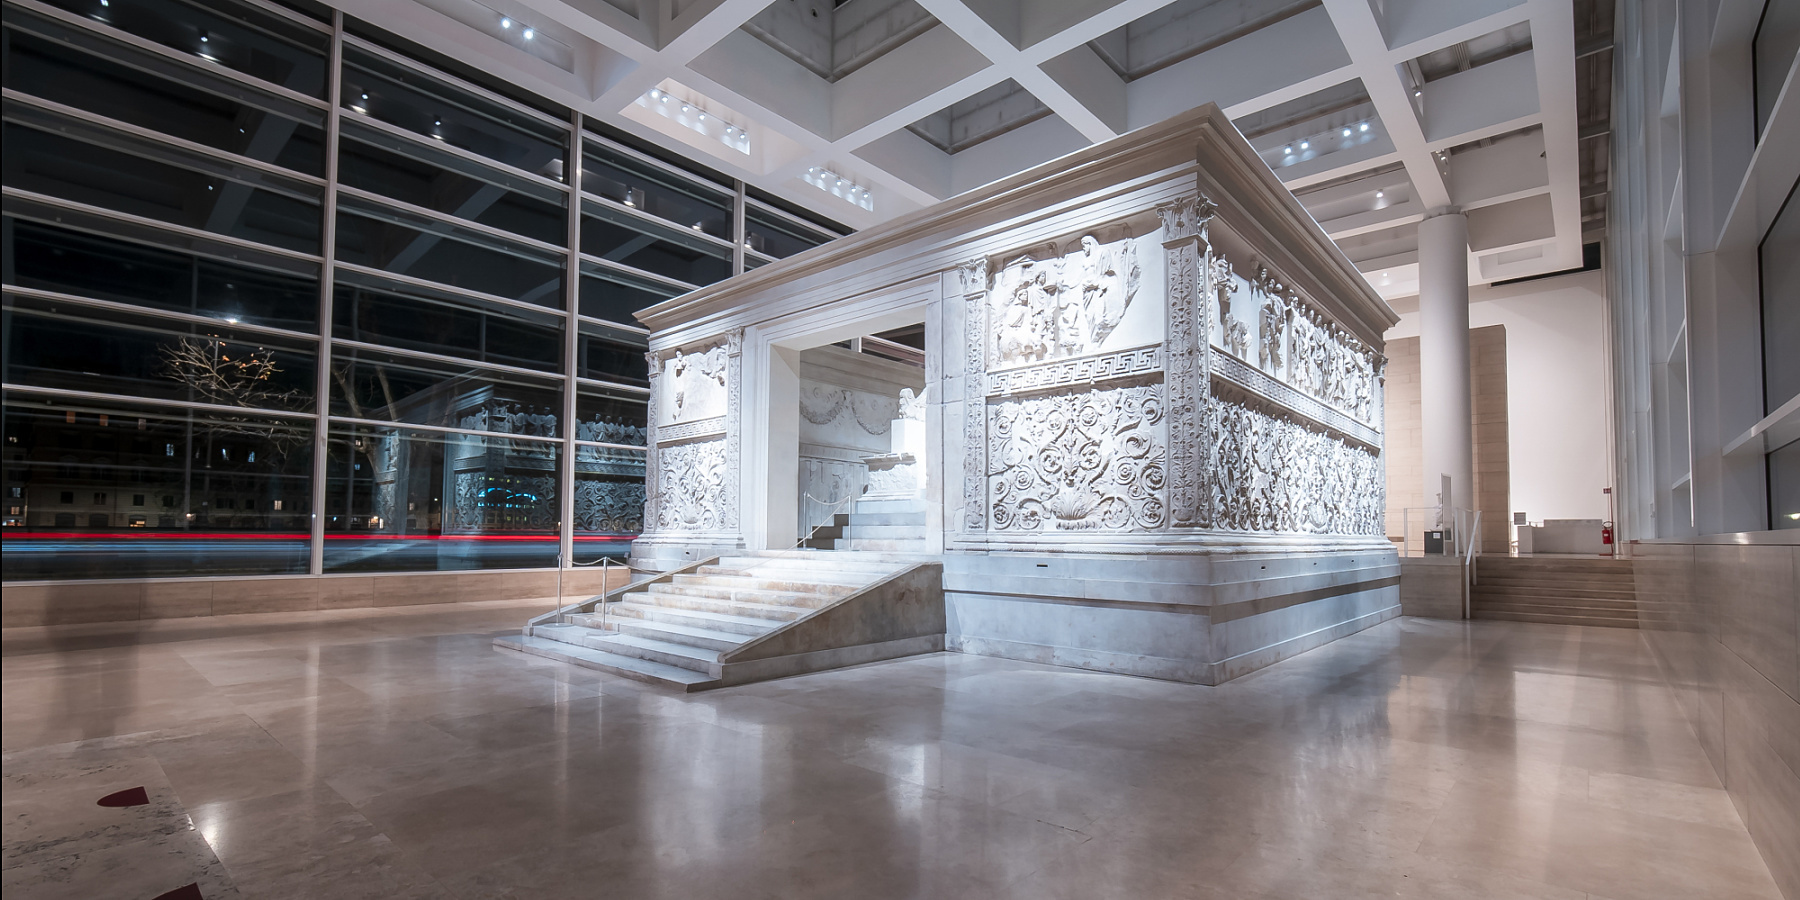 ERCO LED for the Ara Pacis Museum in Rome | ERCO